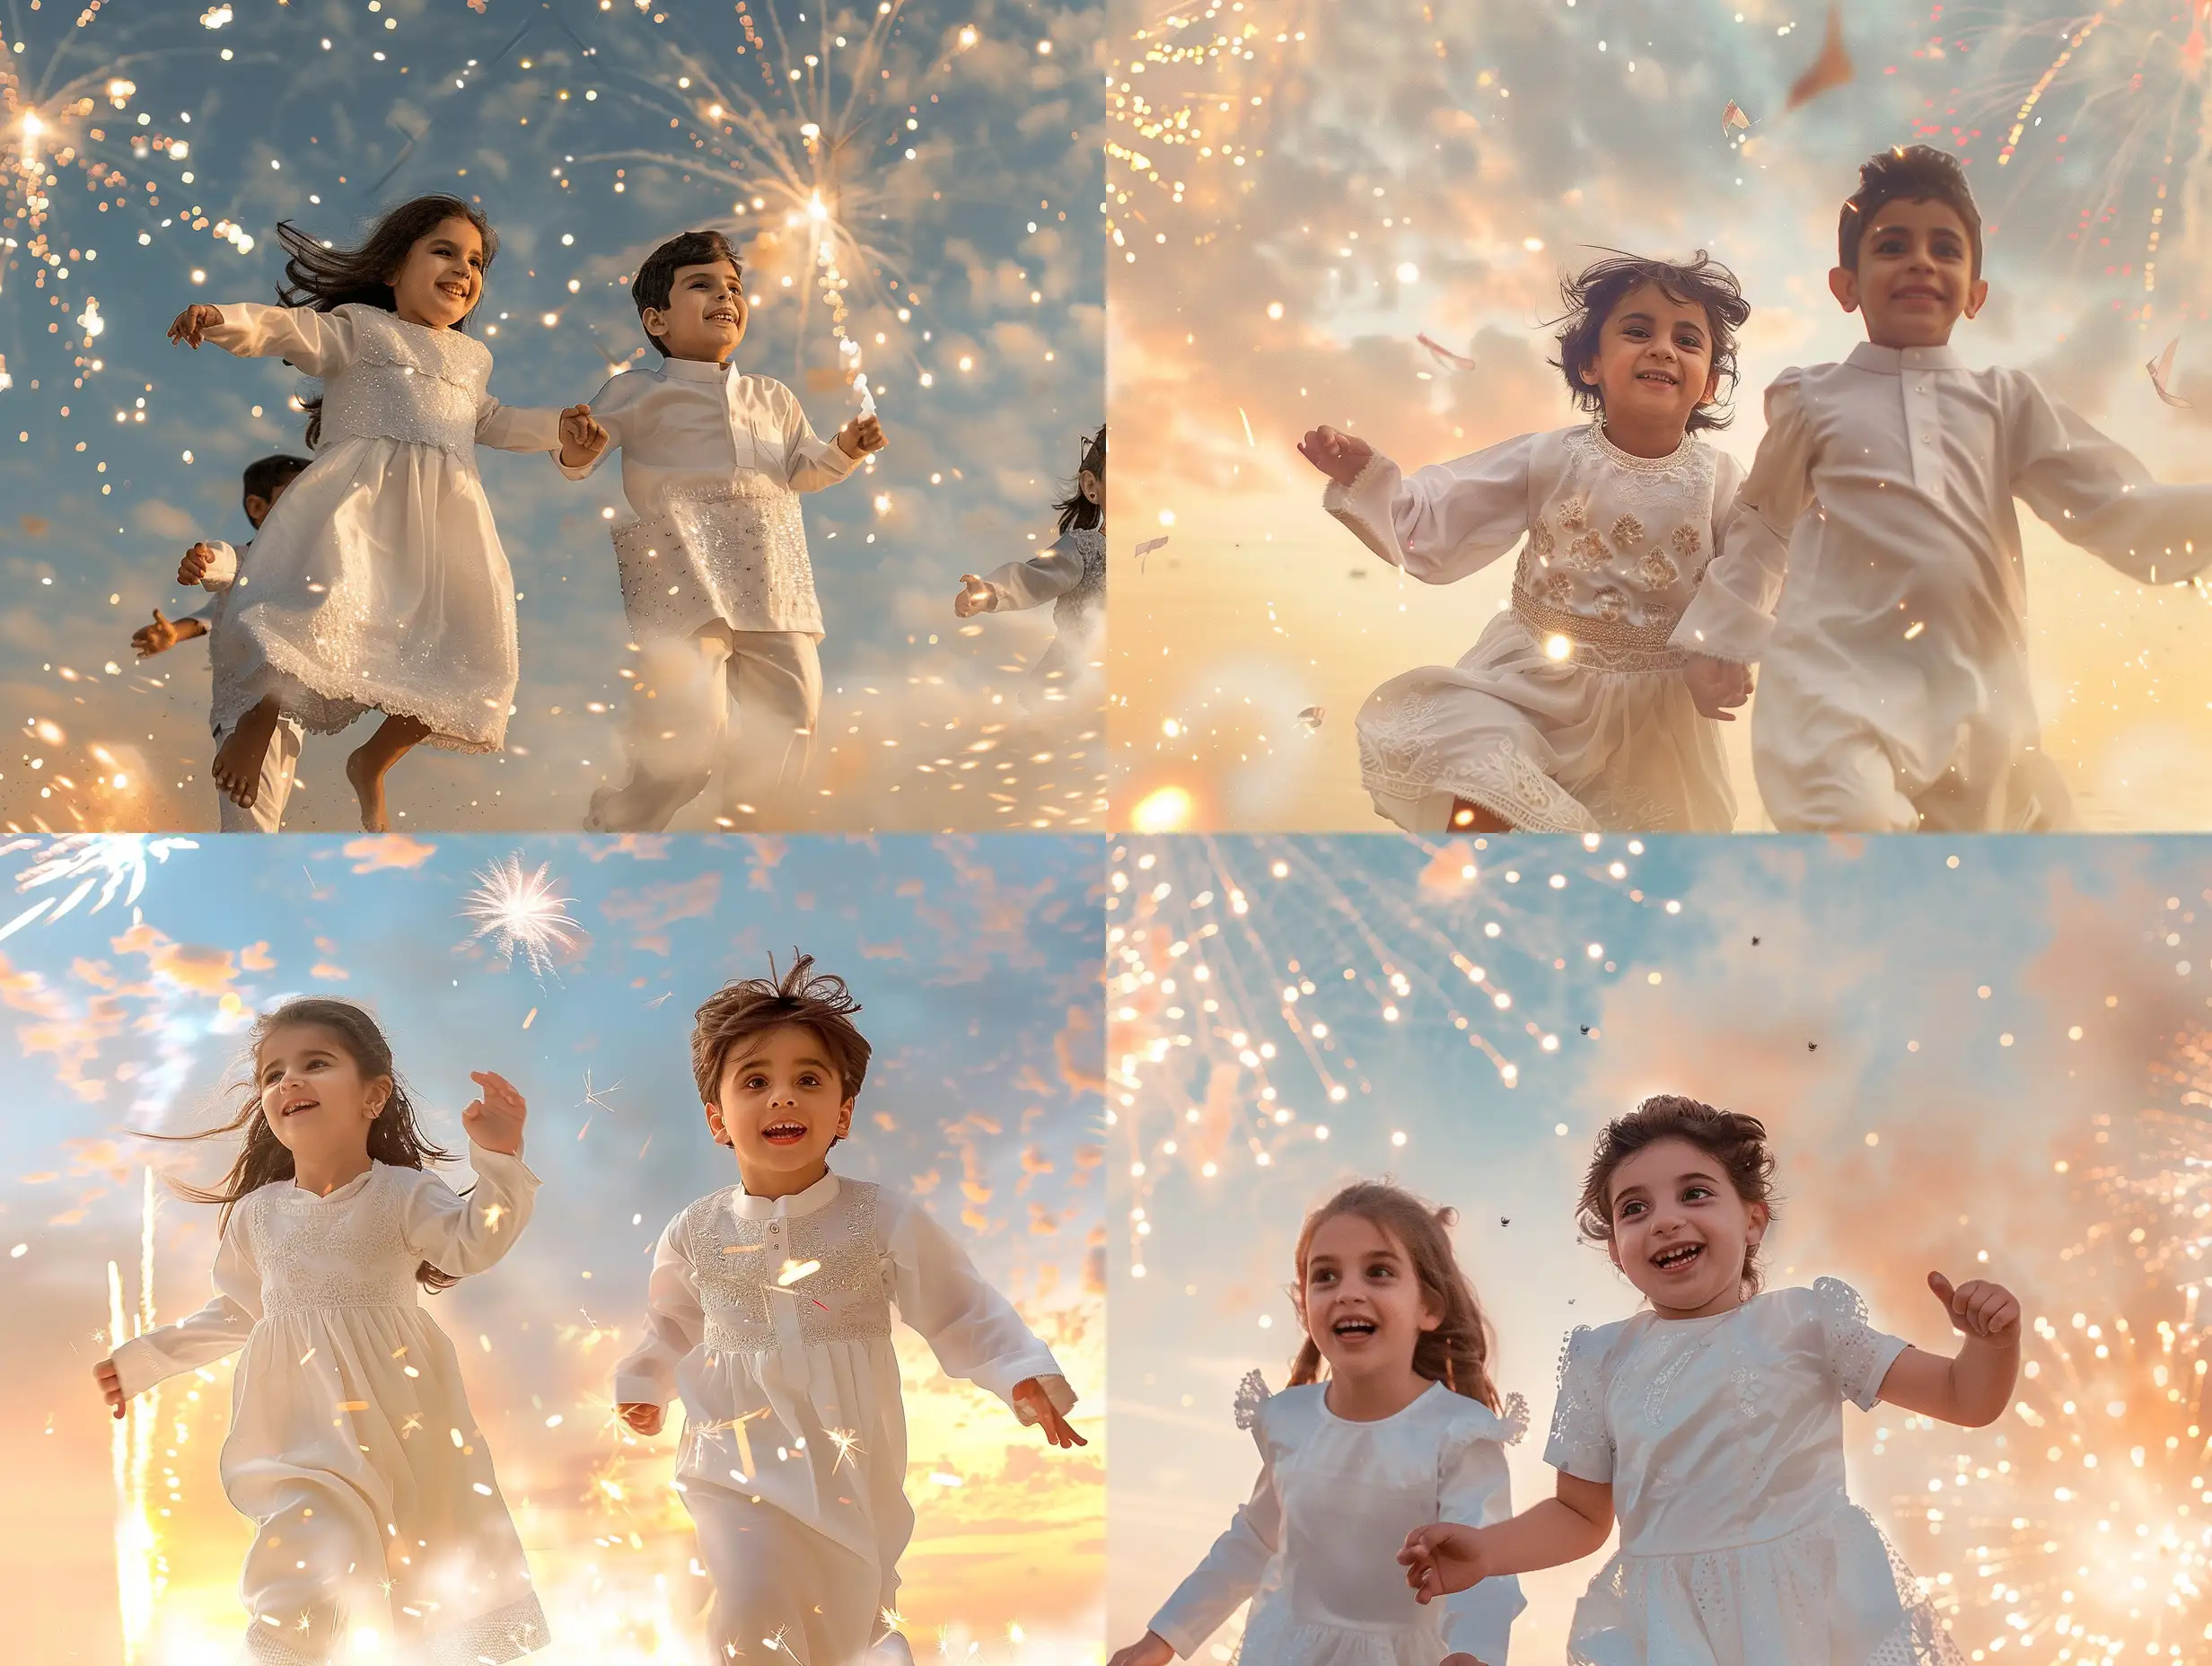 Children in white Eid dresses, running happily in the sky with fireworks, manifestations of the blessed Eid al-Fitr
Professional portrait photography, HD digital camera, contemporary era, warm color palette., Portrait, Realism, Keyshot, Normal perspective, Mirrorless Camera, Natural Light, Delight,